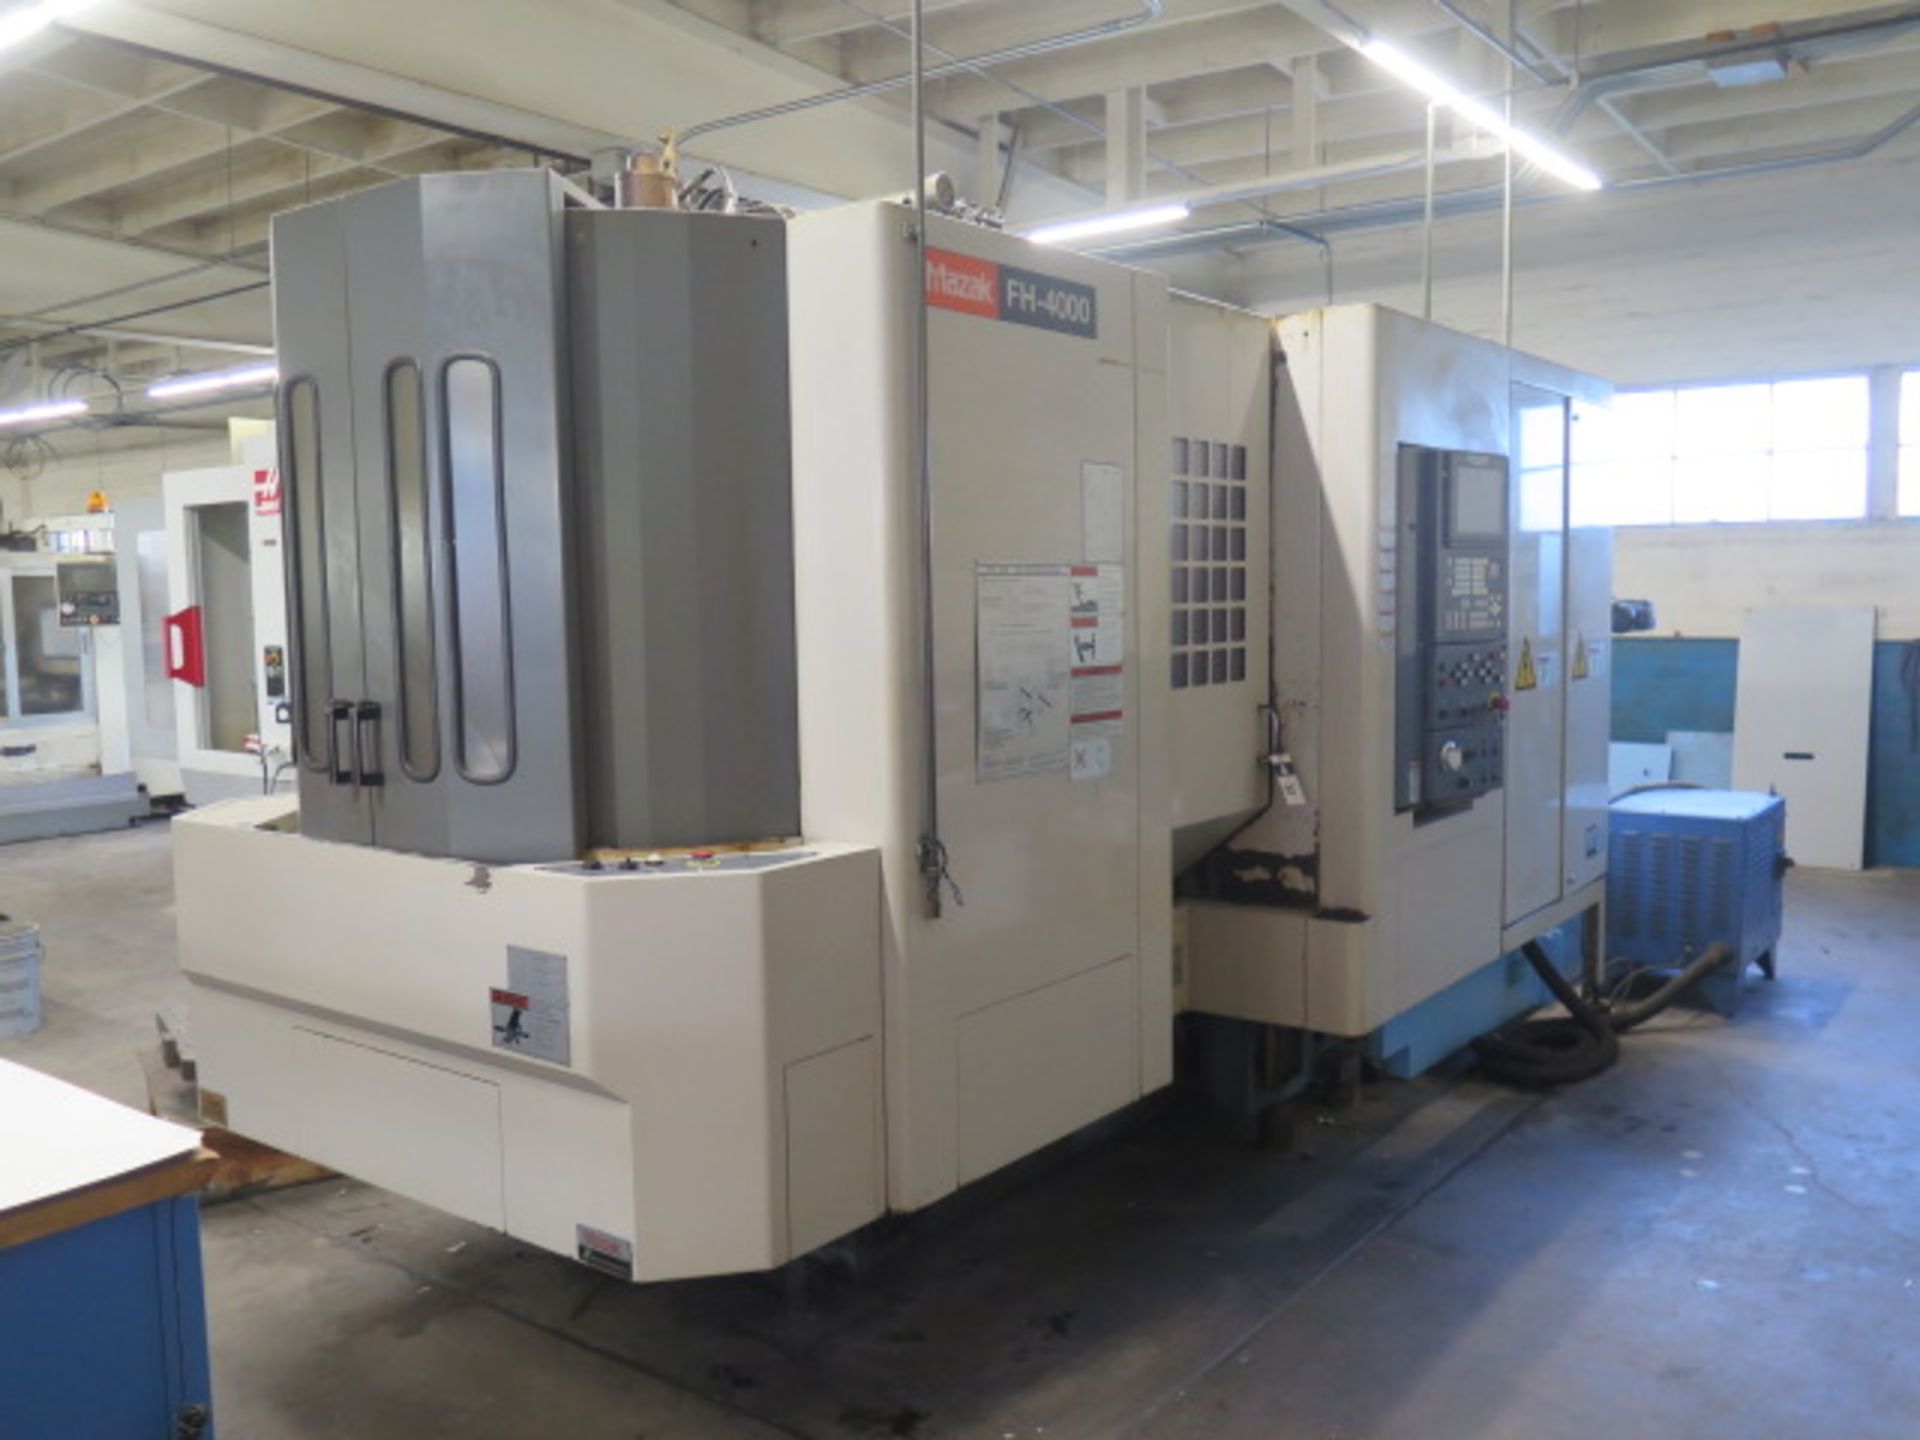 2001 Mazak FH-4000 2-Pallet 4-Axis CNC Horizontal Machining Center s/n 150419, SOLD AS IS